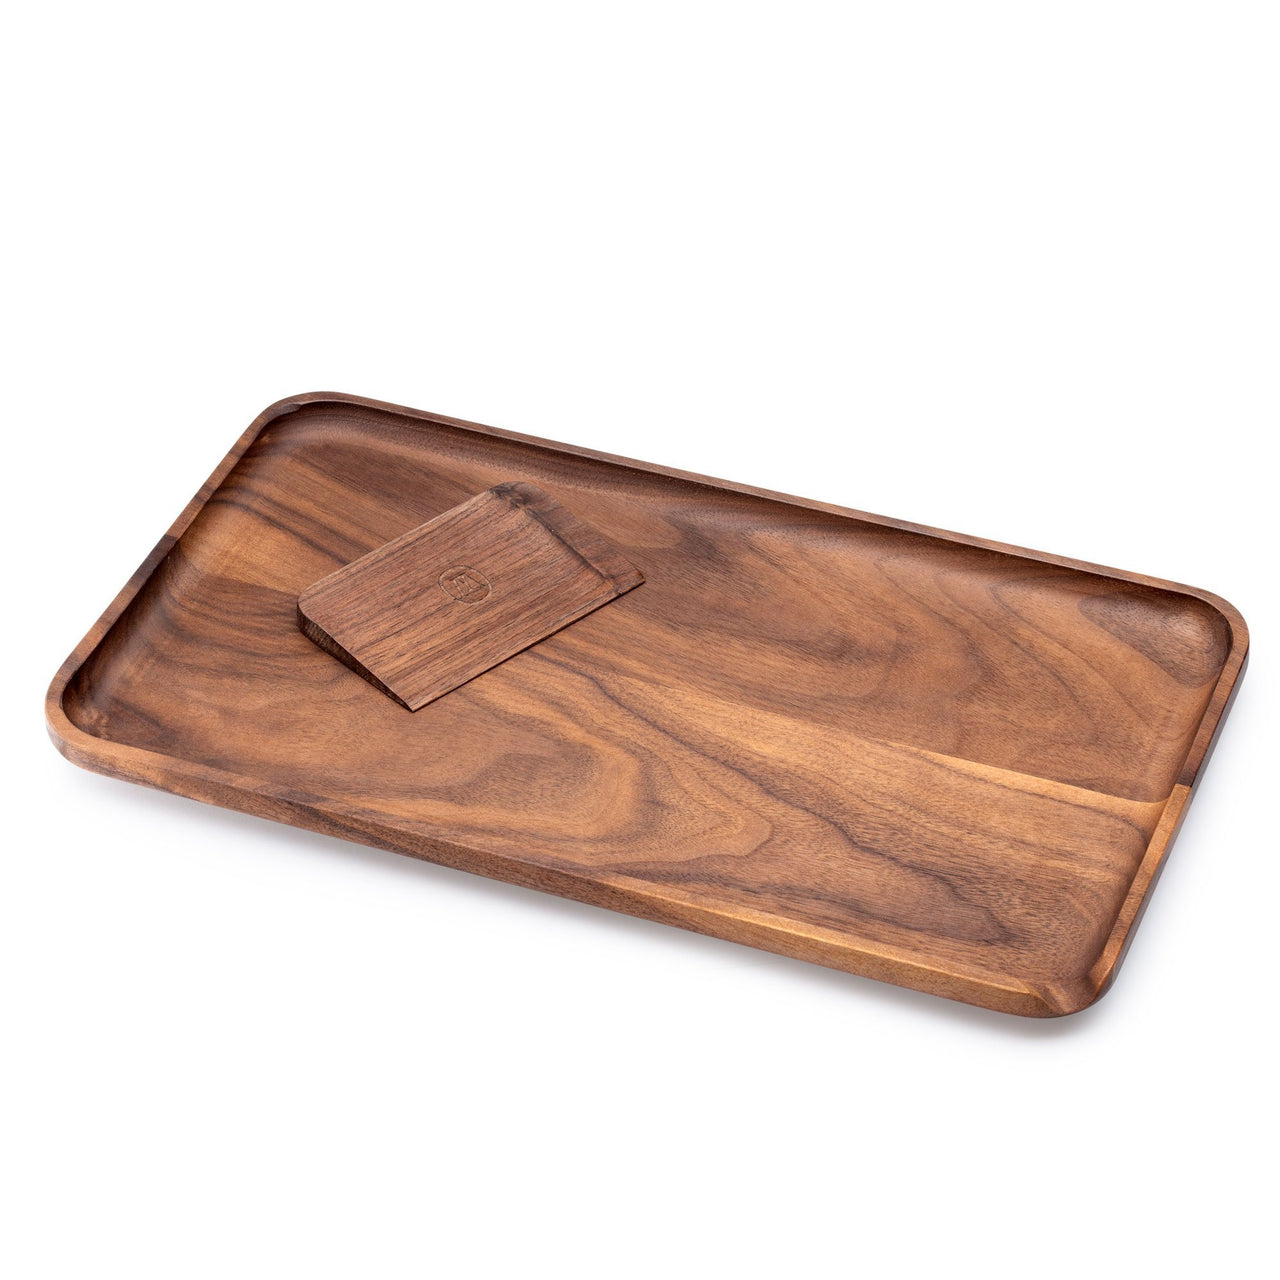 Marley Natural American Black Walnut Rolling Tray - Large